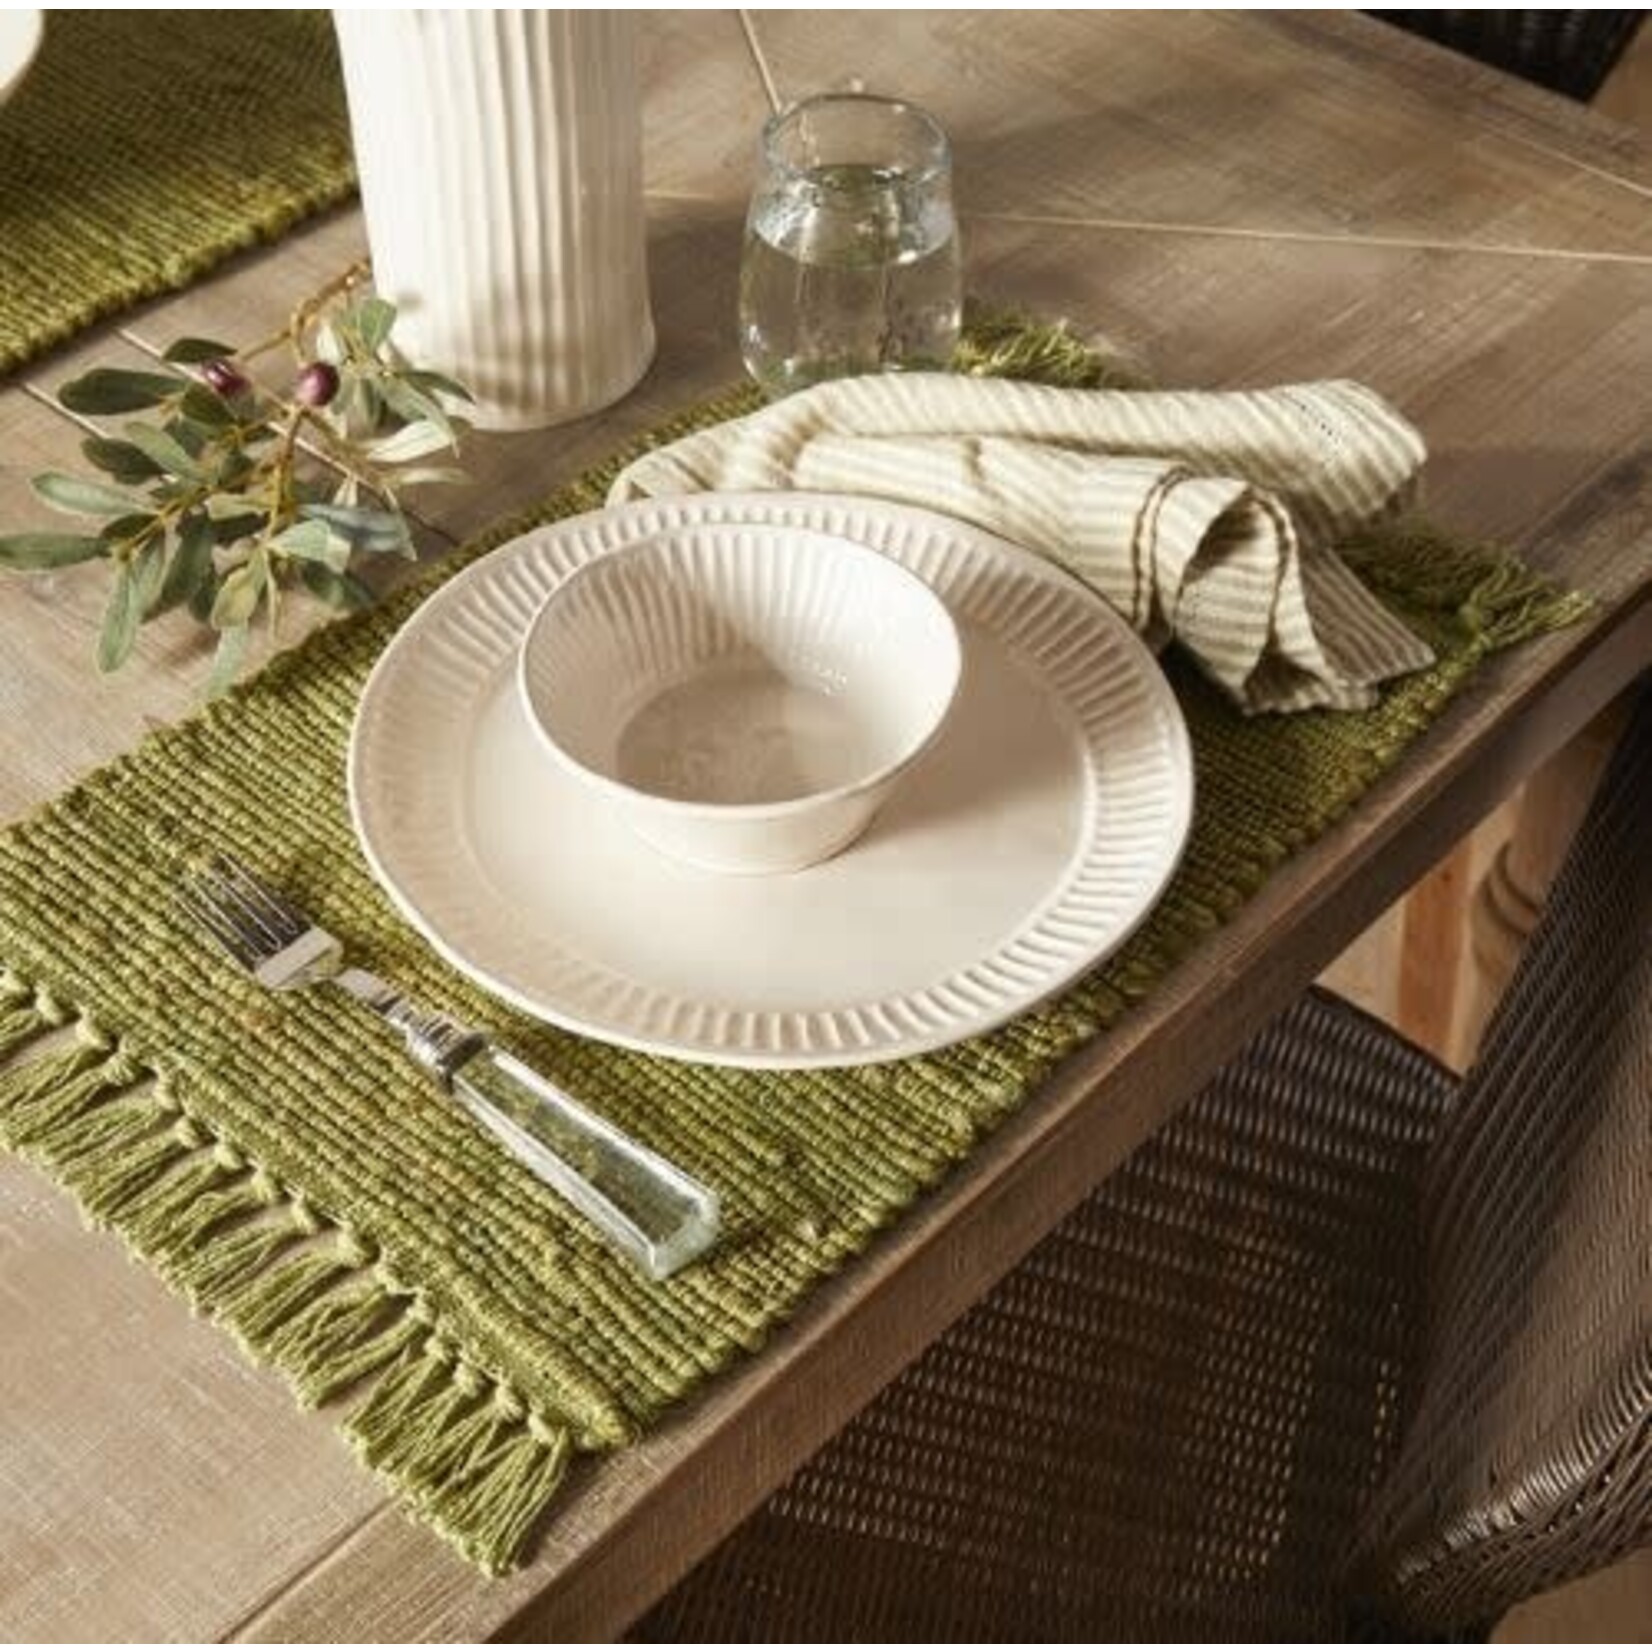 Napa Home and Garden Rae Woven Fringe Placemat